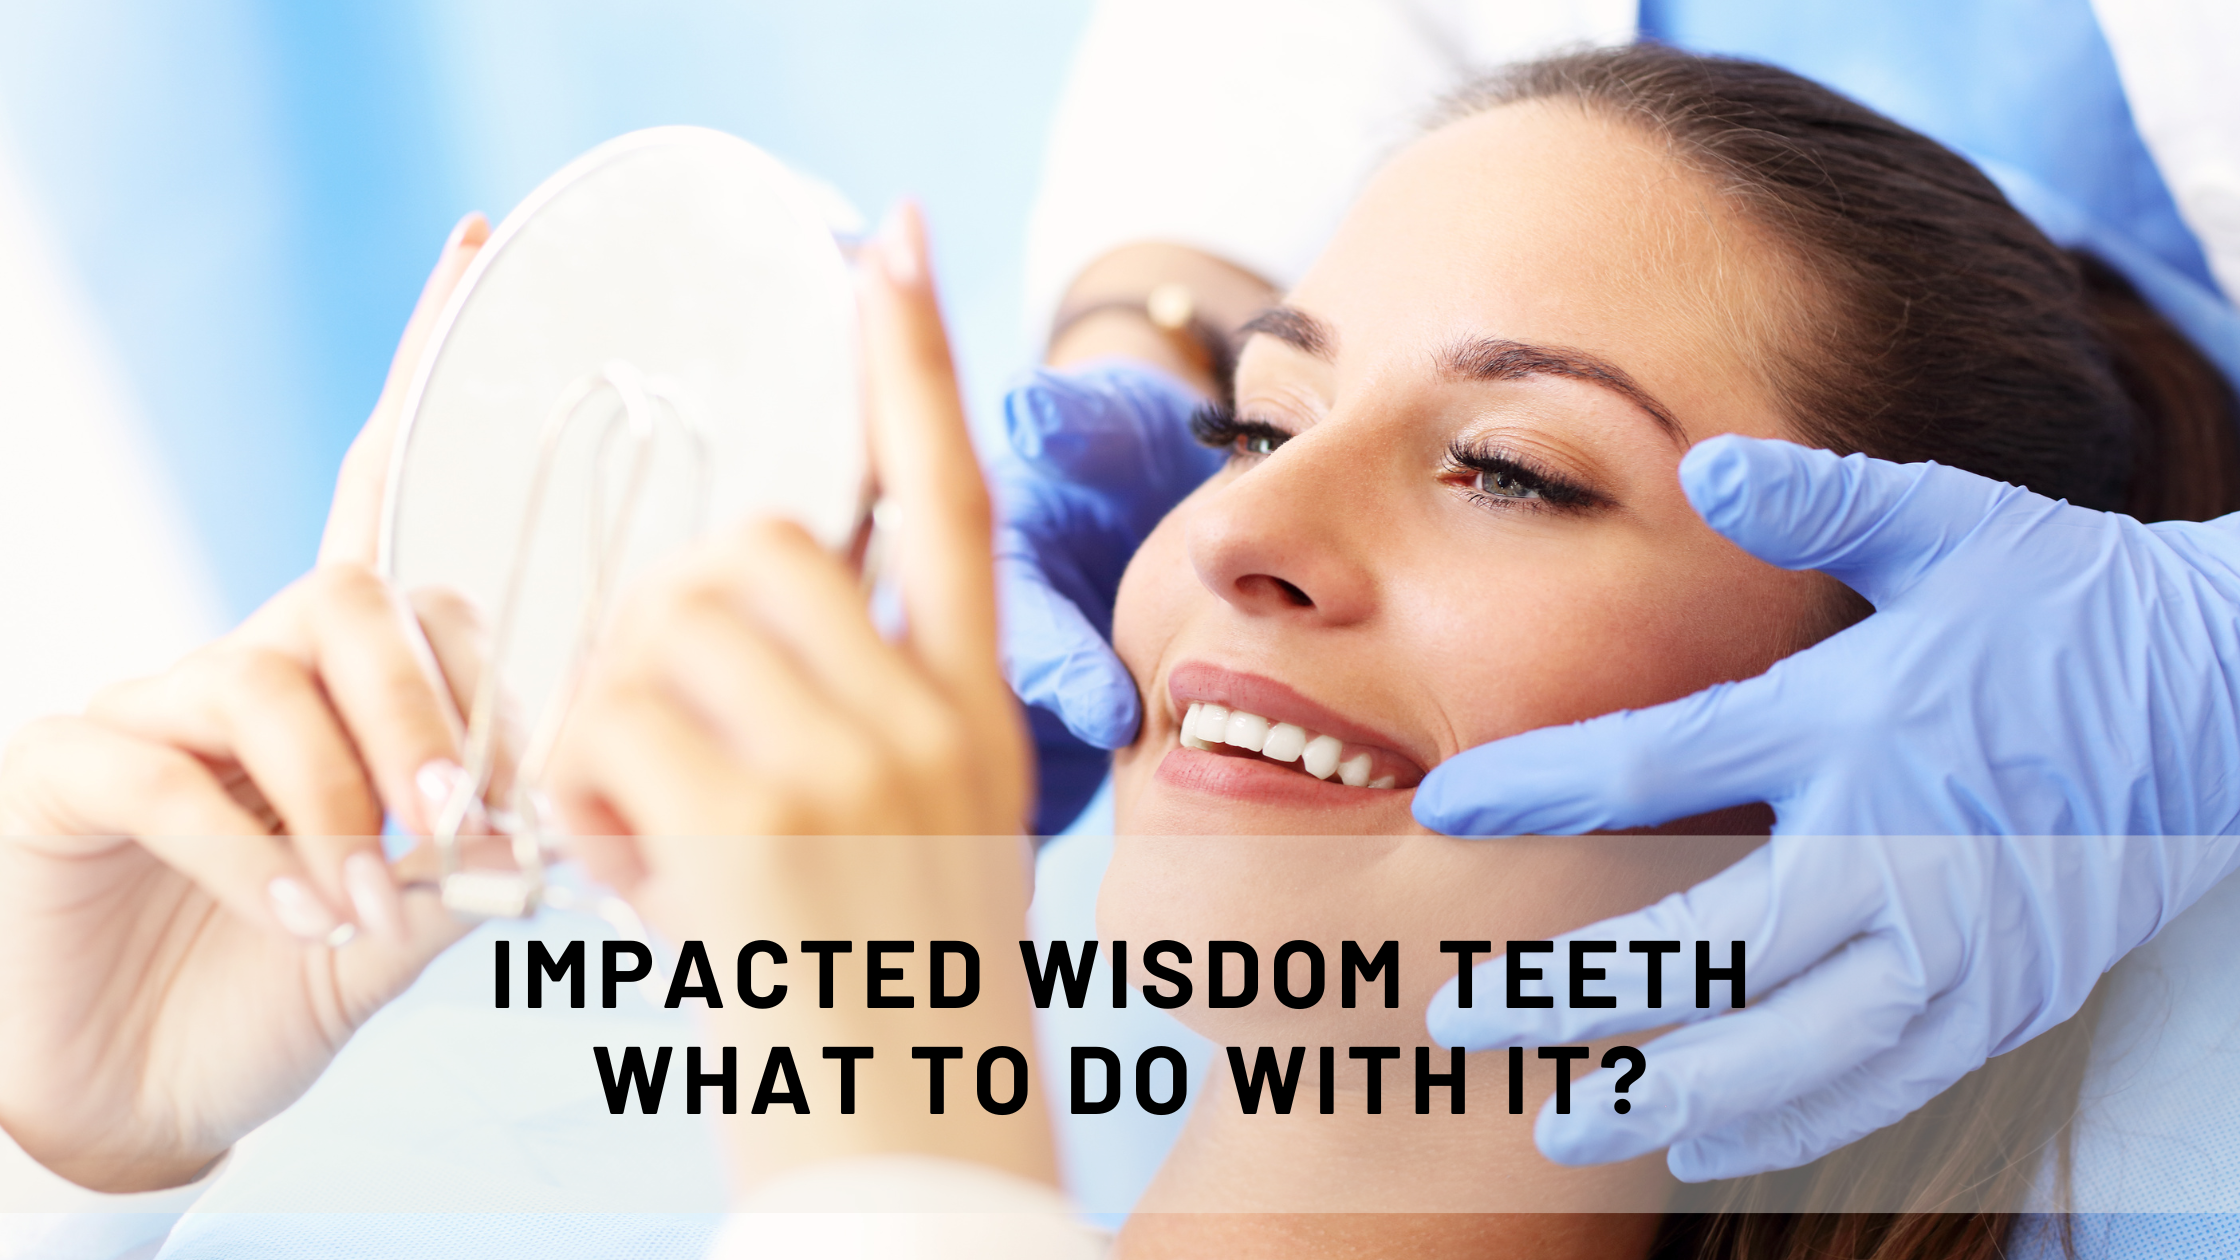 Impacted wisdom teeth what to do with it_